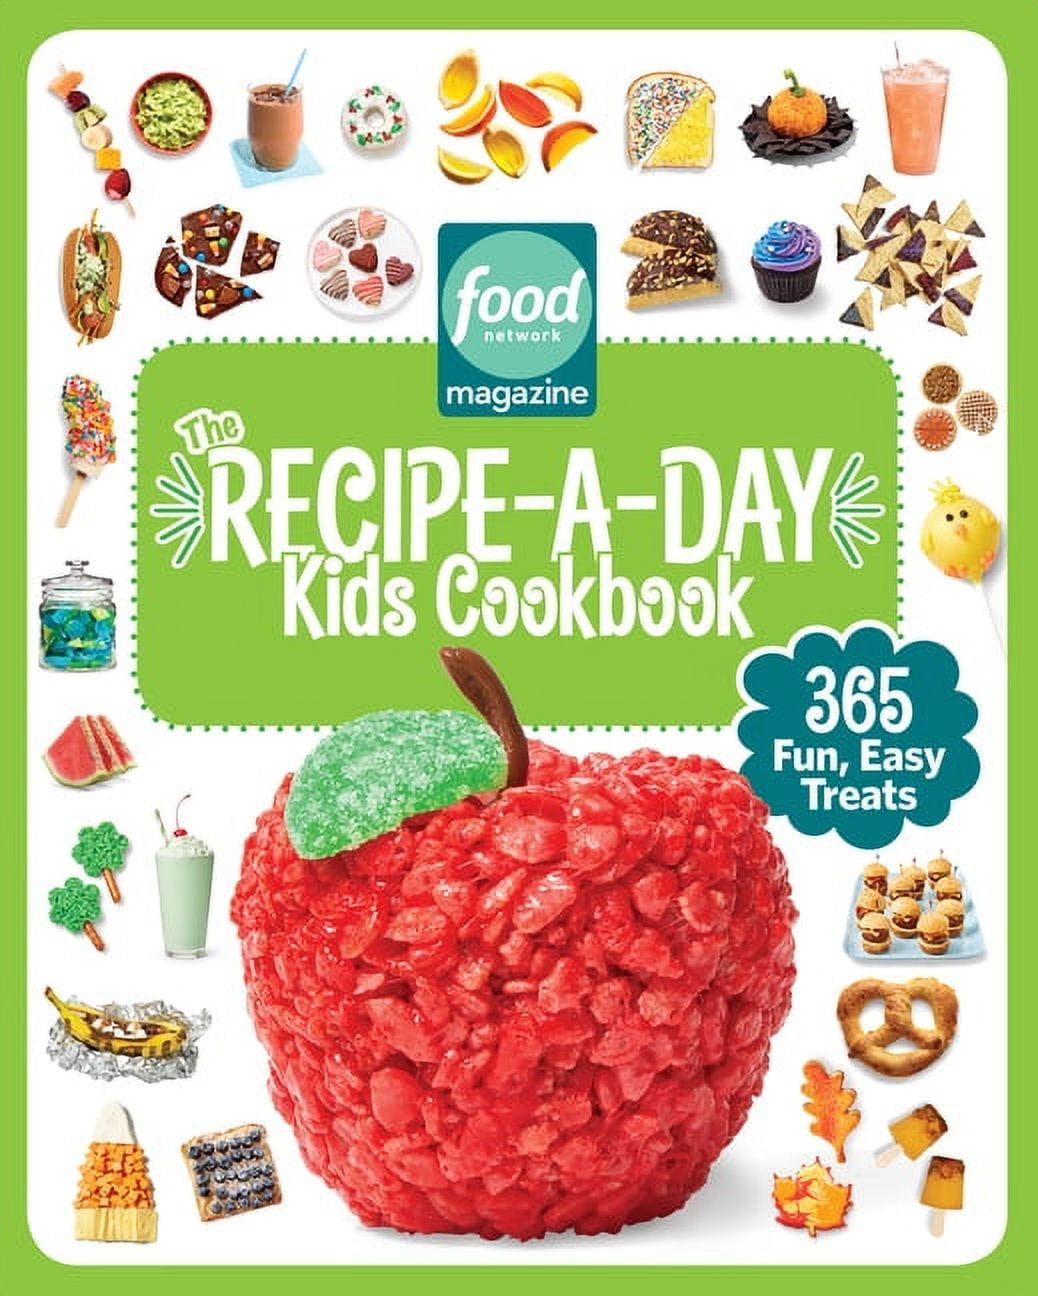 Kids Can Make: Play Dough : Food Network, Family Recipes and Kid-Friendly  Meals : Food Network